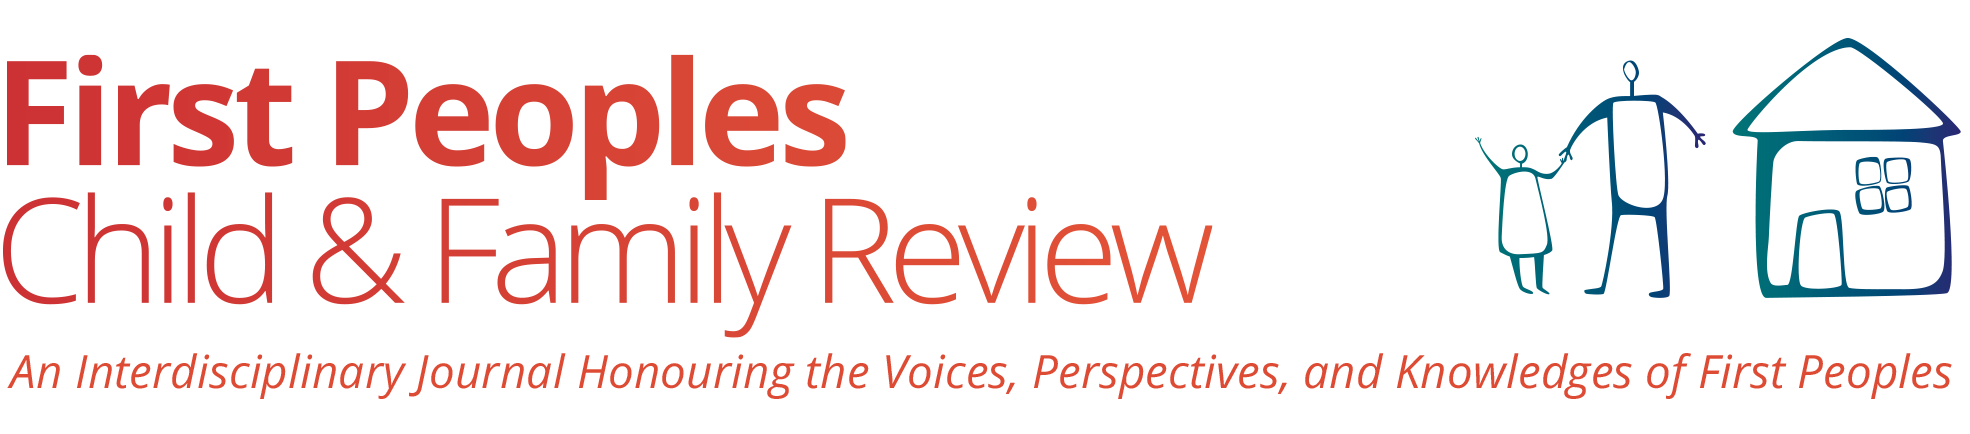 First Peoples Child & Family Review logo